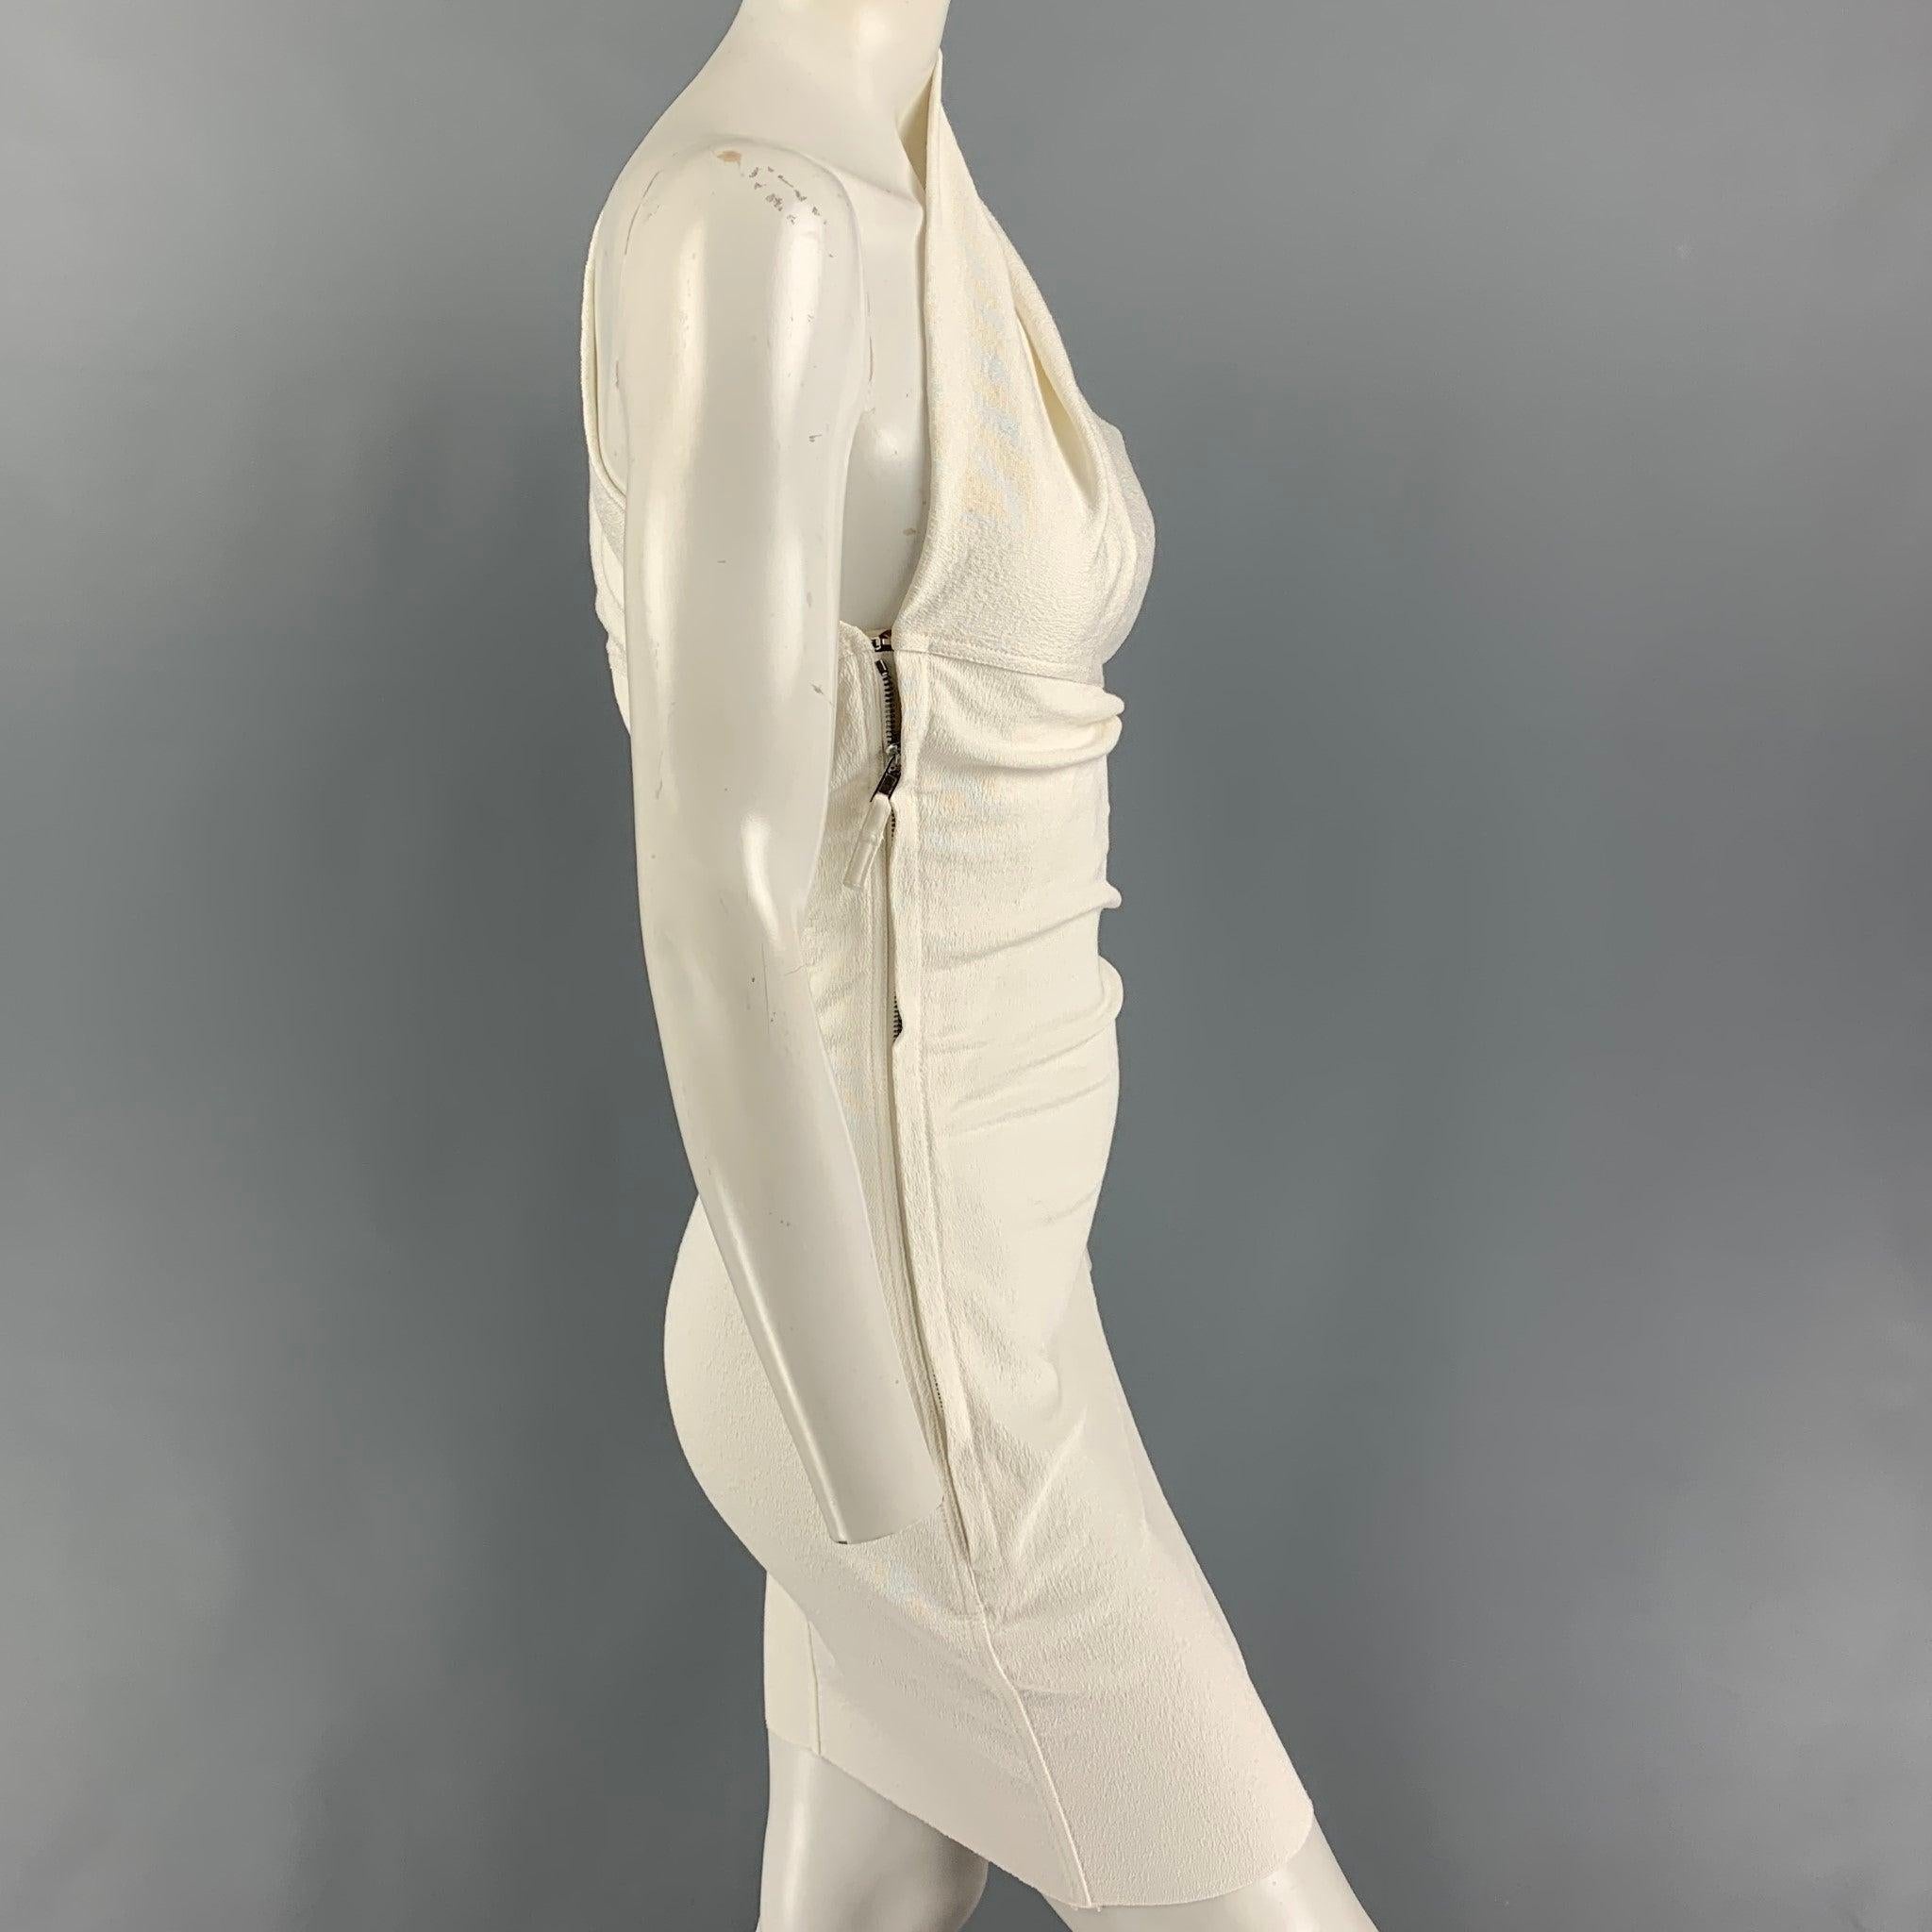 RICK OWENS STROBE FW 22 'Diana' dress comes in a off white crepe cotton blend featuring a over the shoulder draped sculptural silhouette, single sleeve, and a concealed hook & zip closure.
Very Good
Pre-Owned Condition. 

Marked:  IT 38 / GB 6 / DE